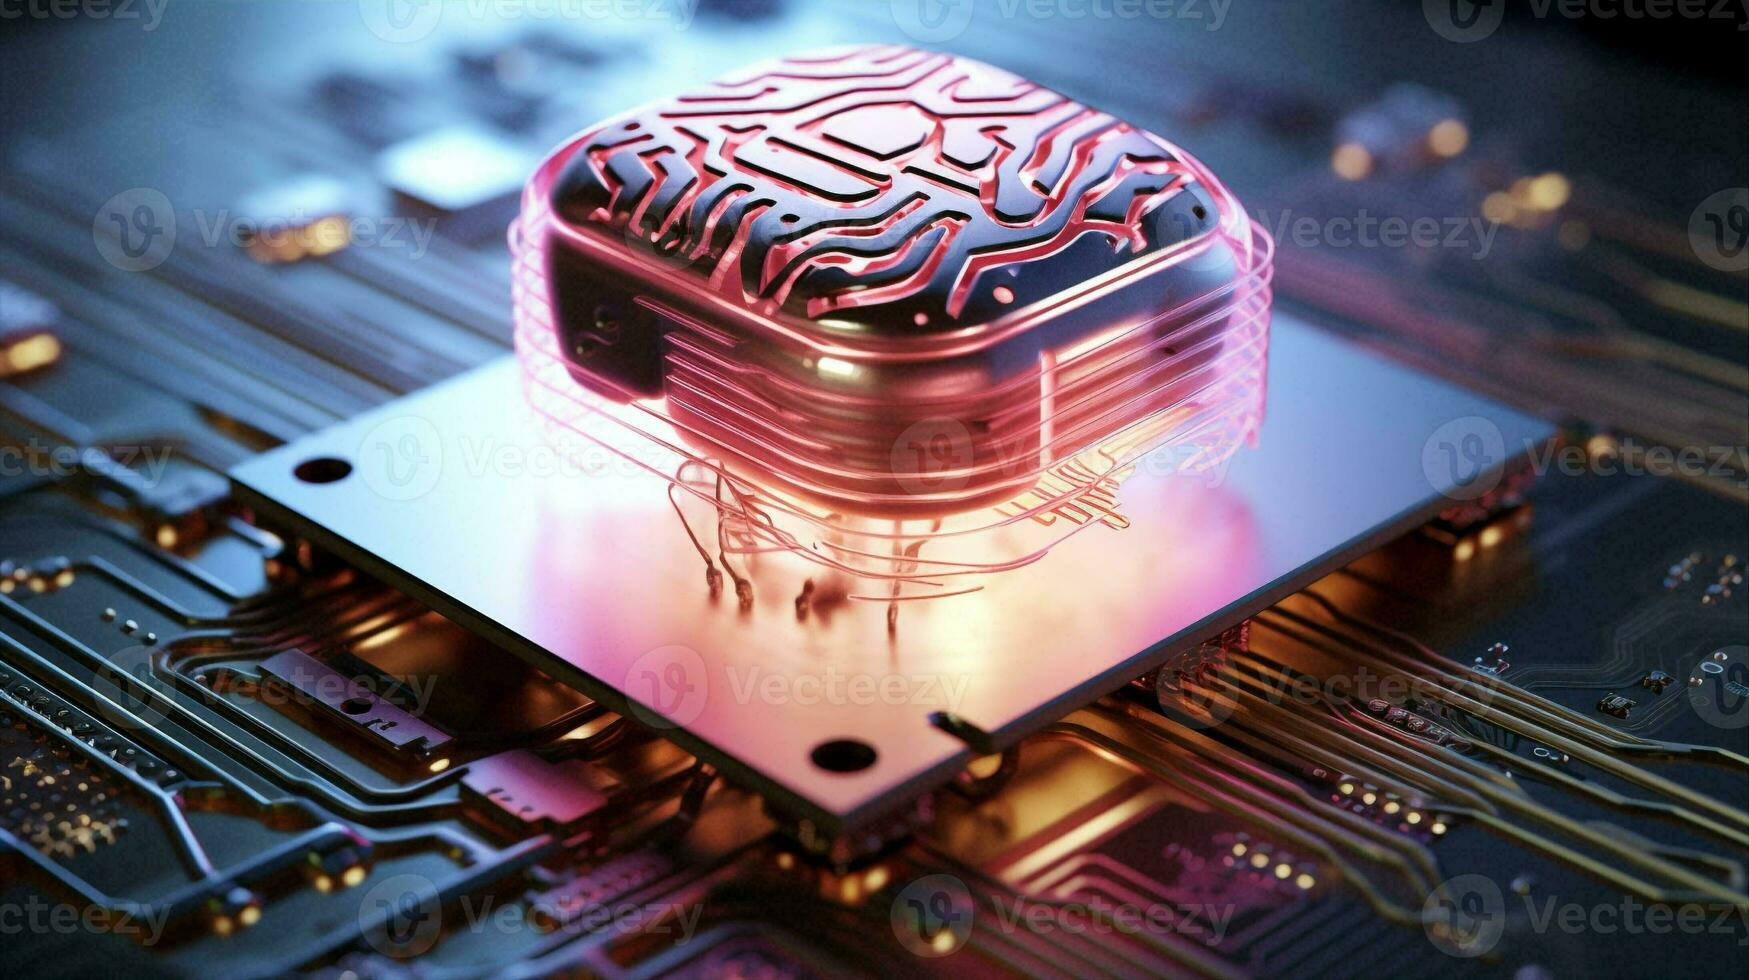 Concept pink robot artificial science intelligence technology abstract neon brain digital photo